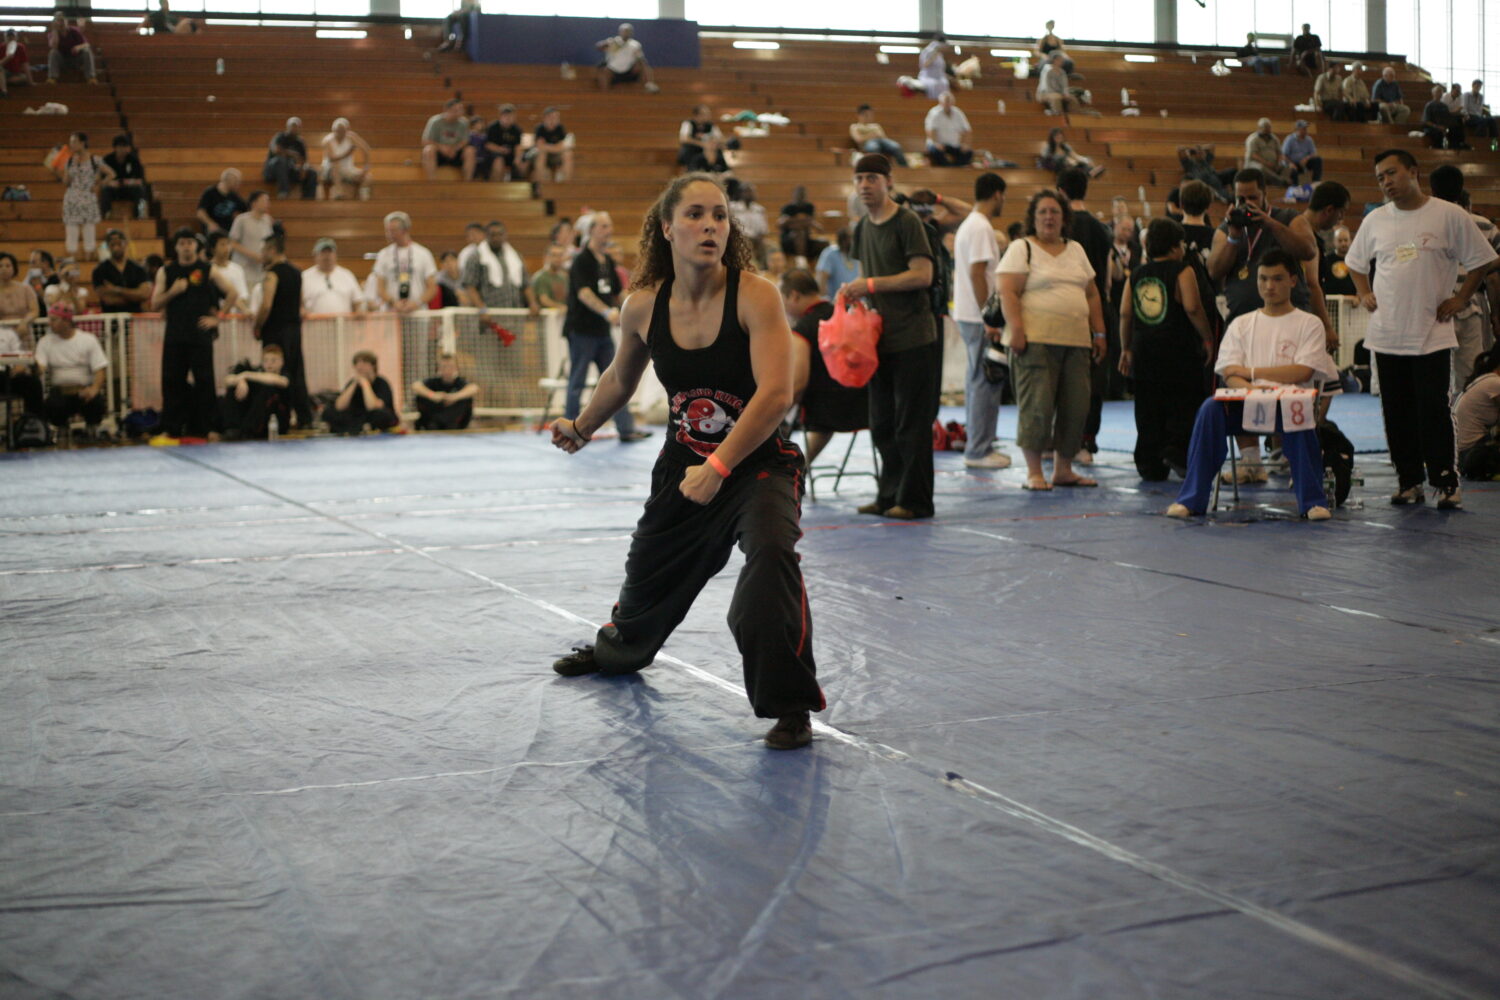 Form competition at US Open Martial Arts Championship organized by the WFMAF